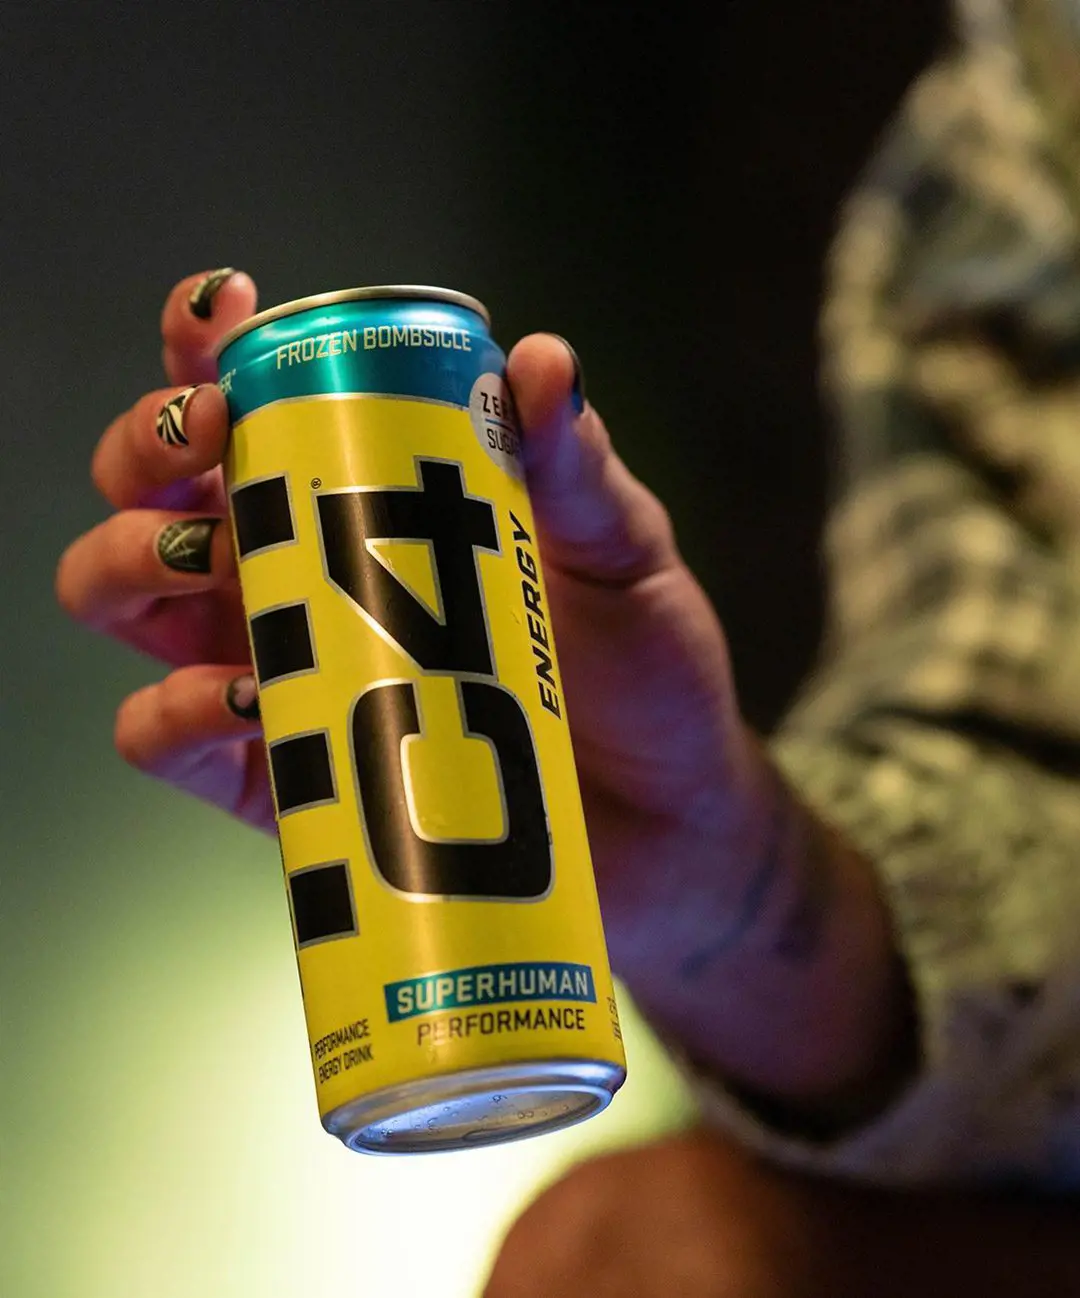 C4 energy drinks are wildly famous among athletes including NBA players